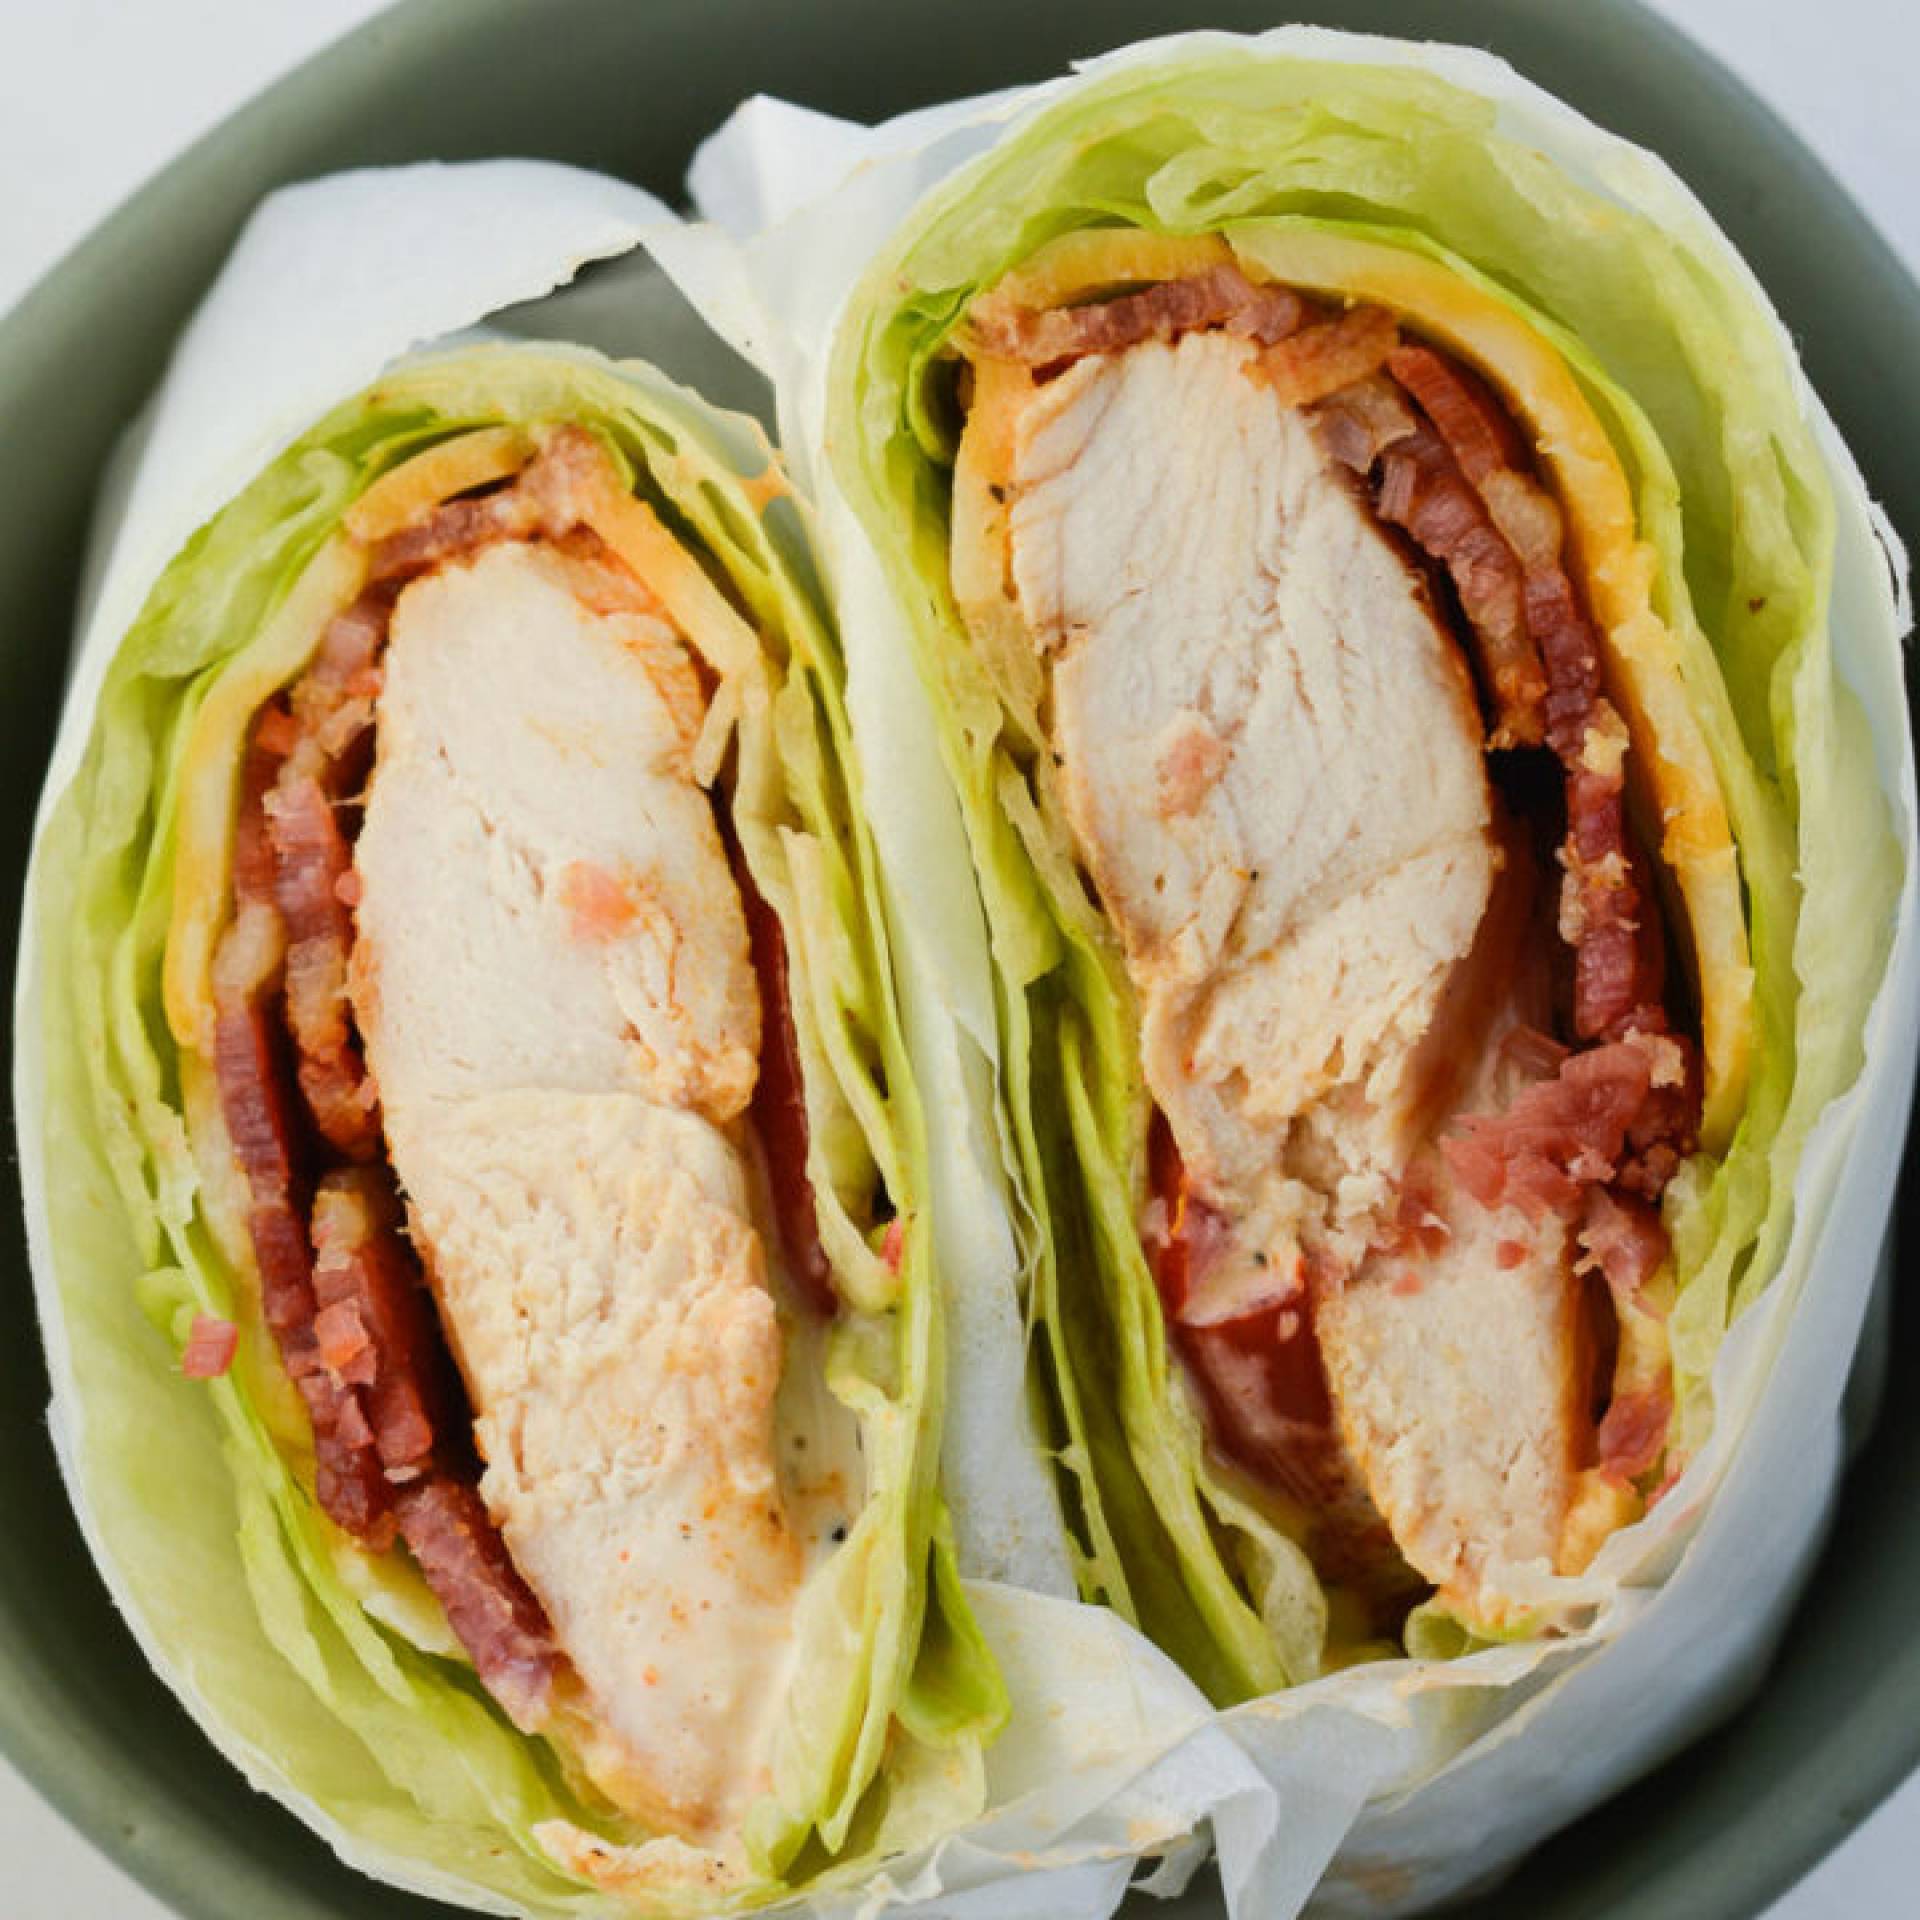 BLT Club Wrap with Grain free chips